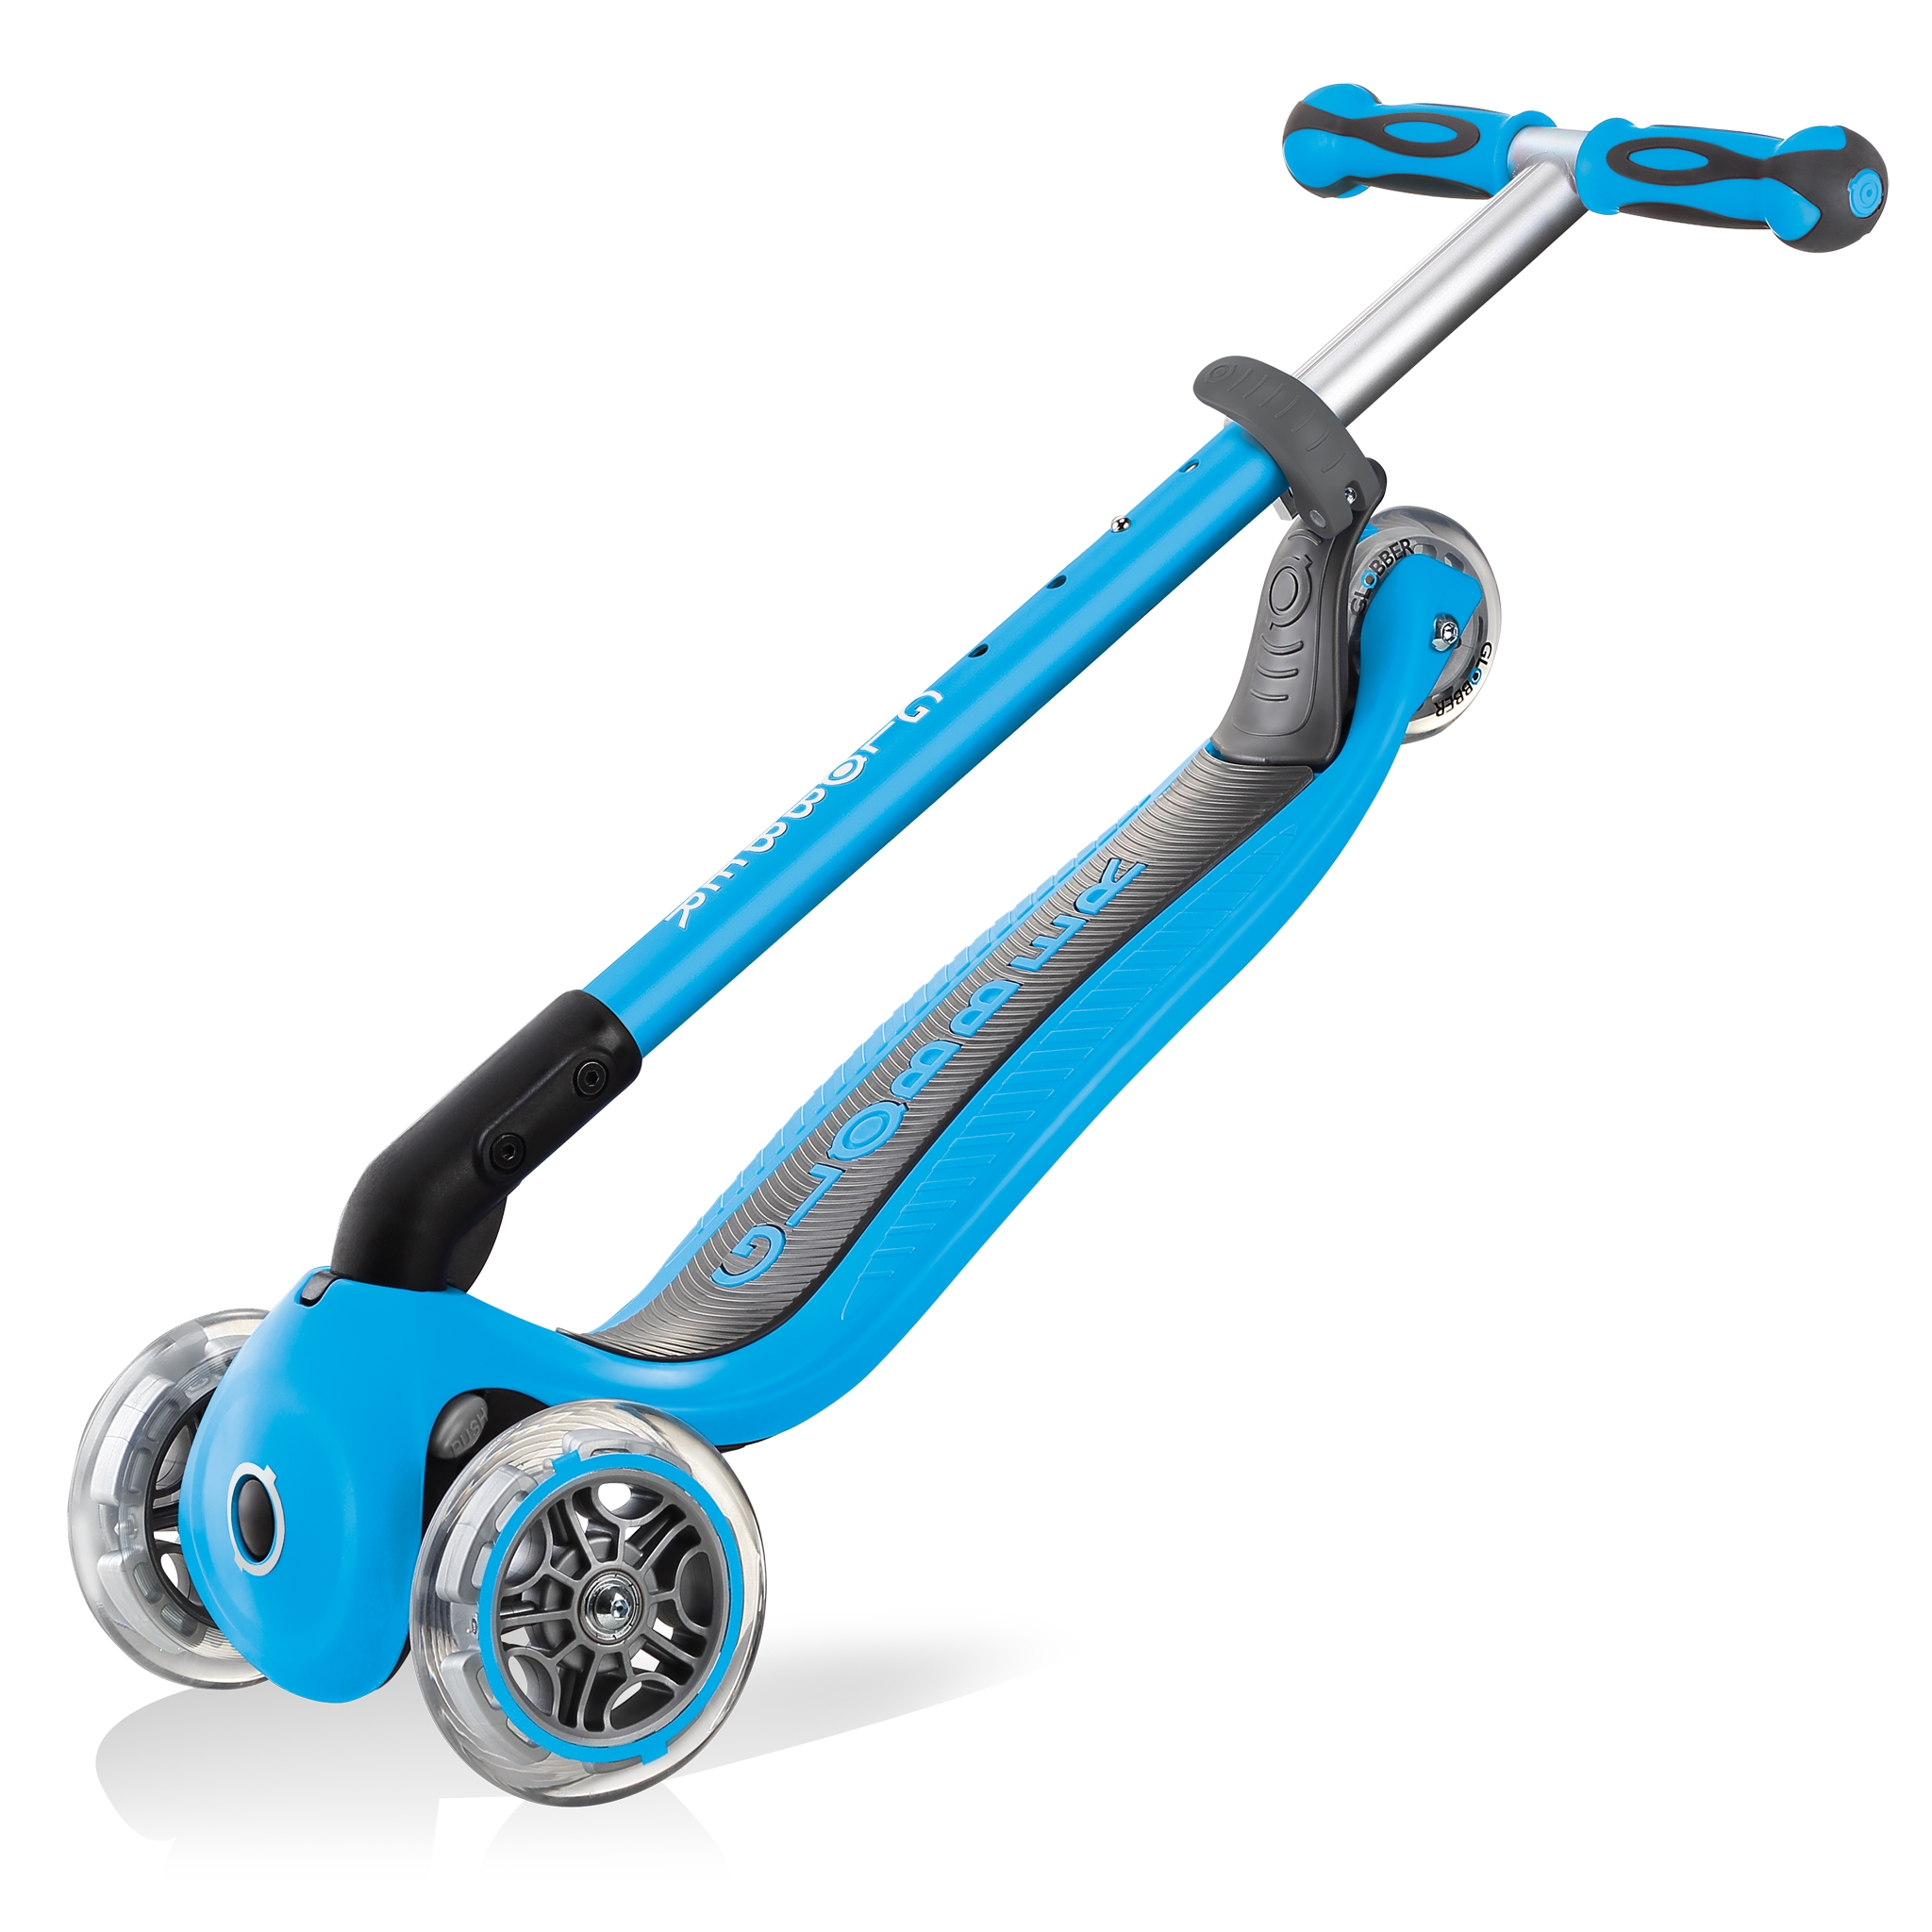 GO-UP-DELUXE-ride-on-walking-bike-scooter-trolley-mode-compatible-sky-blue 5